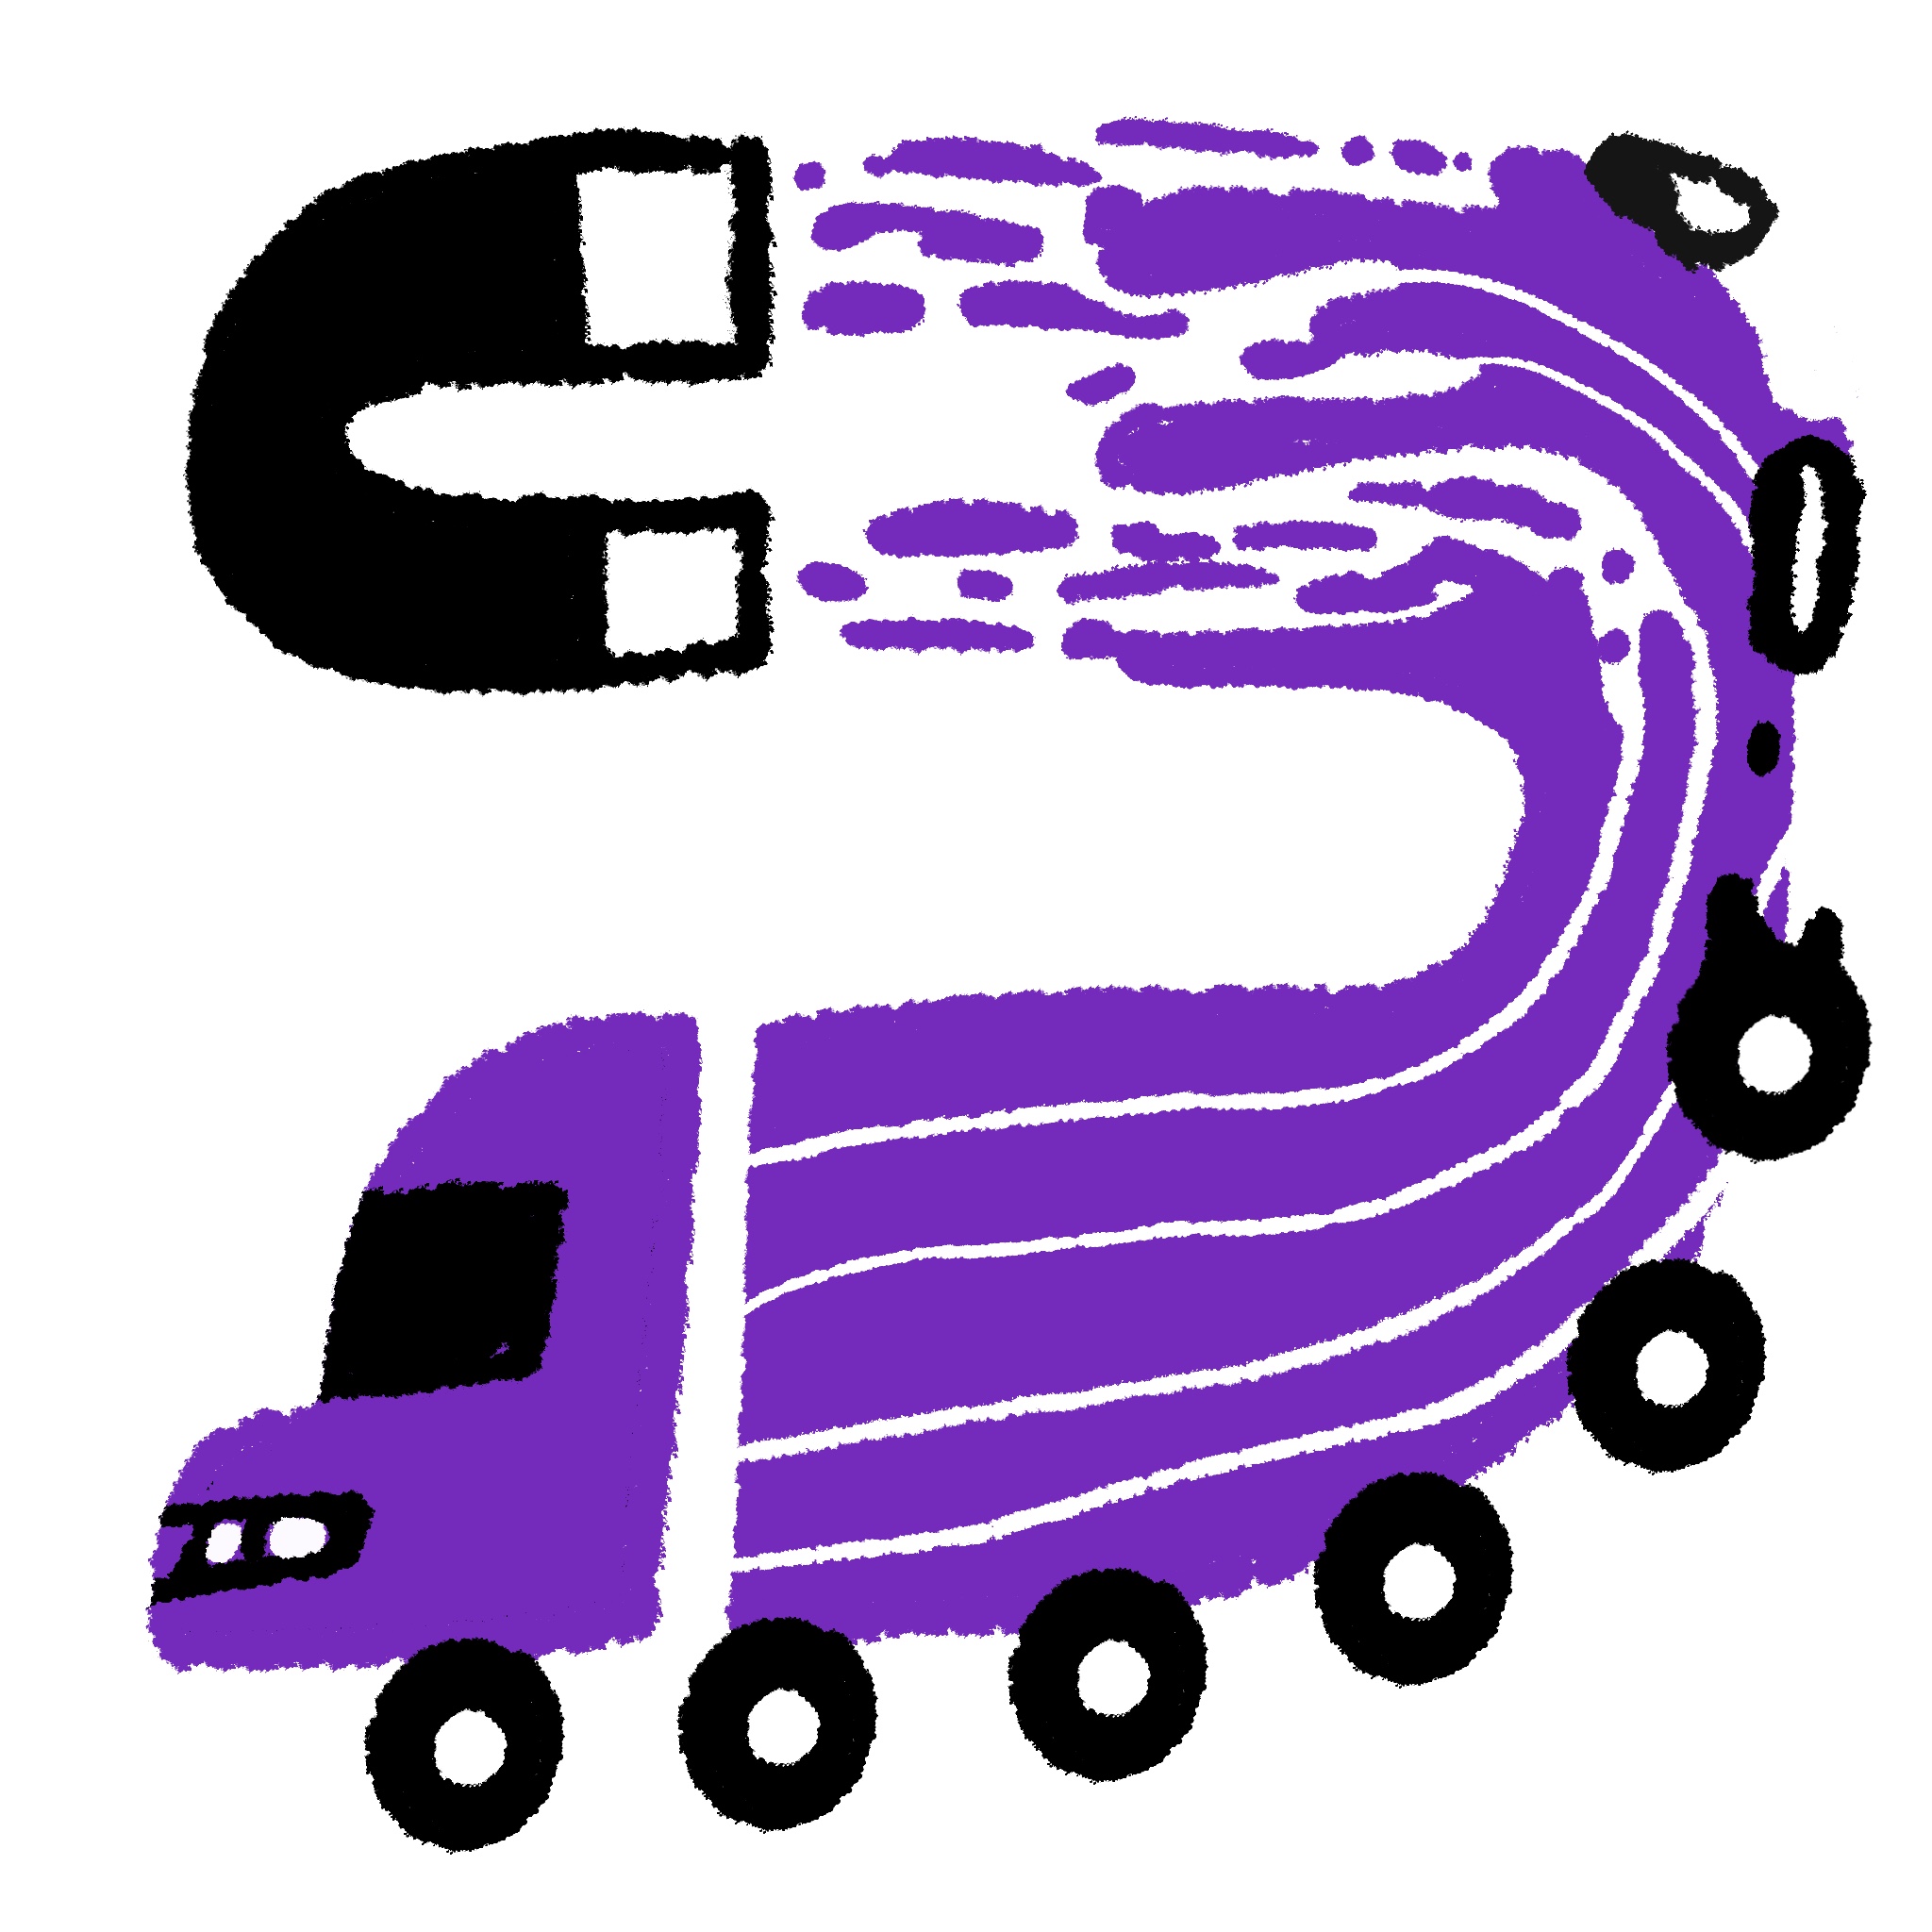 Spot illustration of a magnet drawing in a truck that is melting